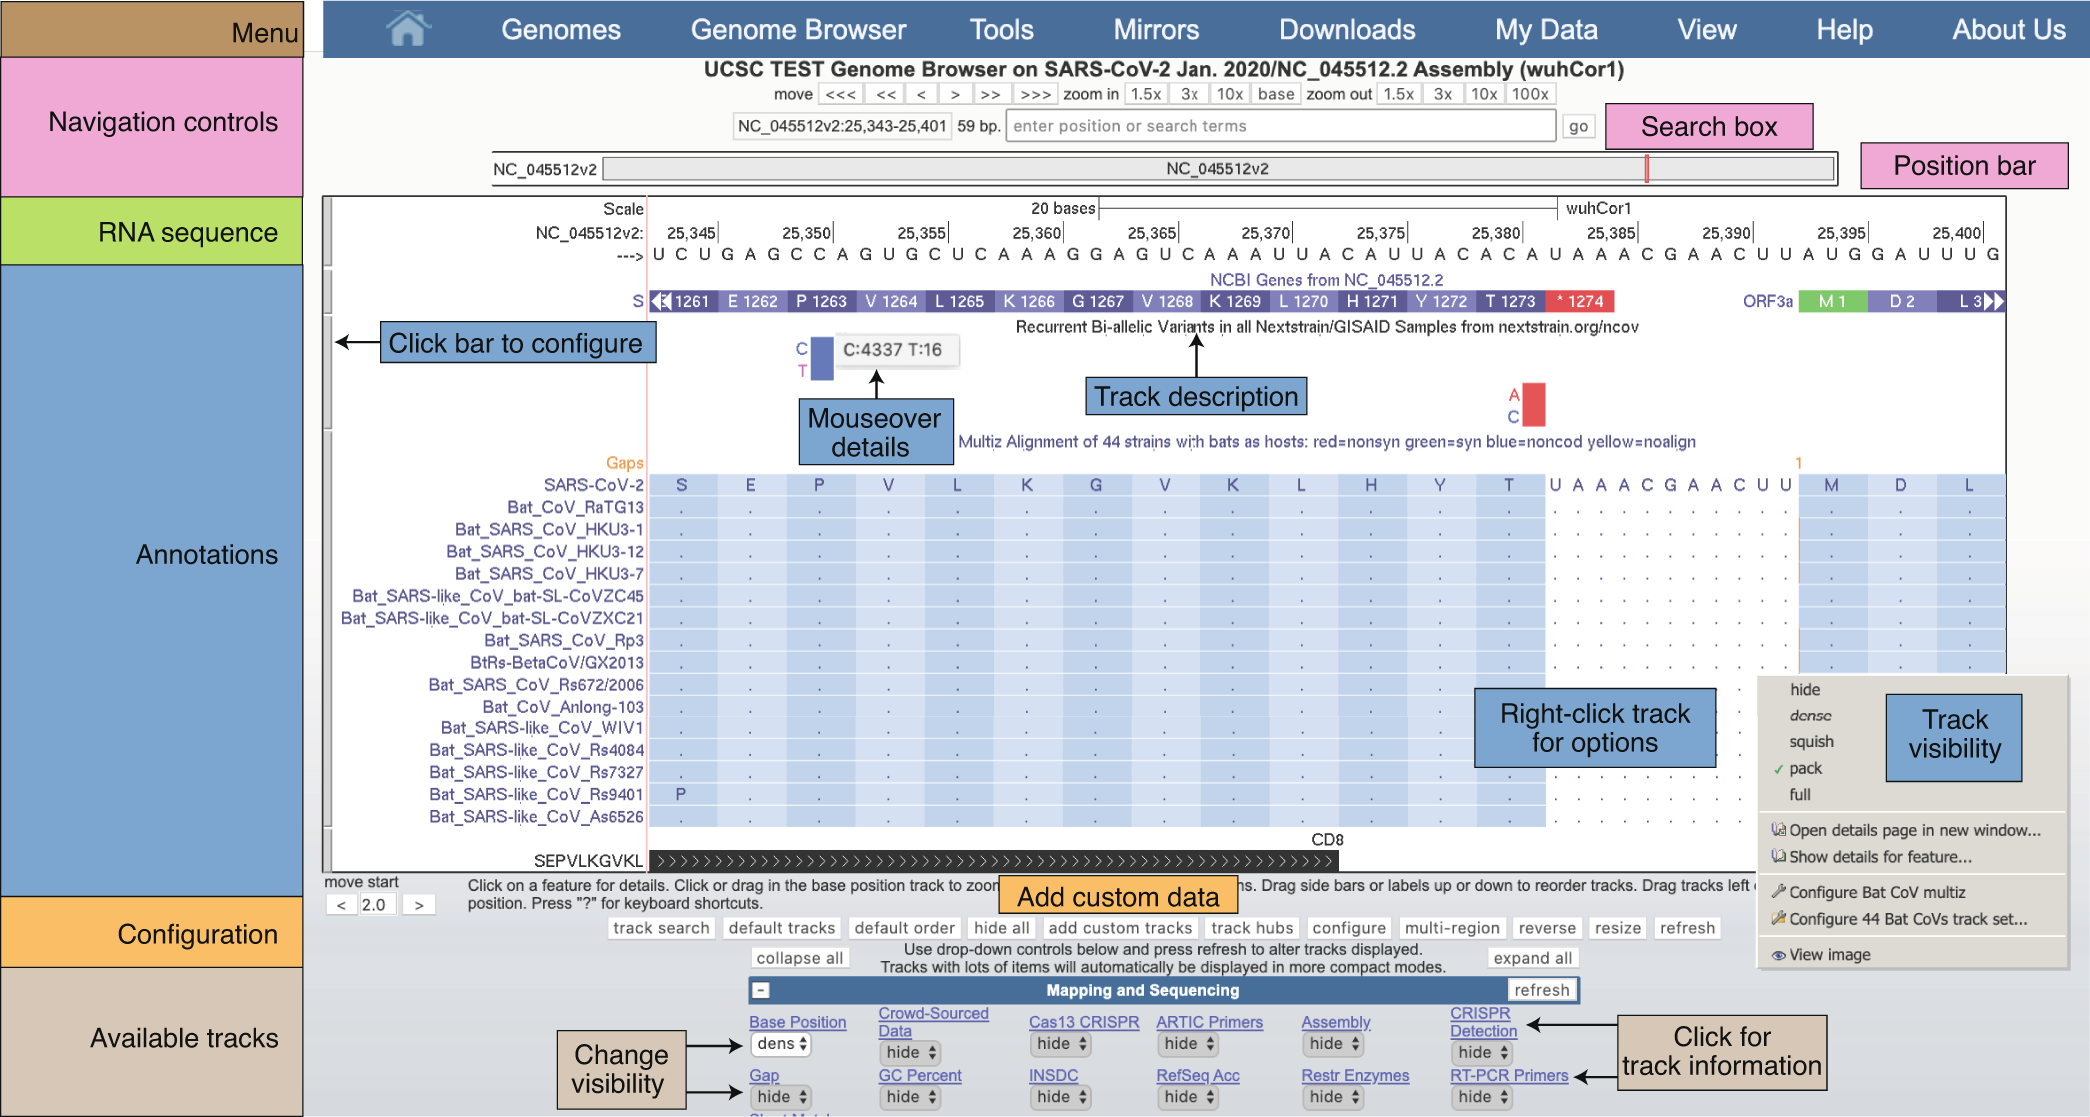 Labeled orientation to the Genome Browser